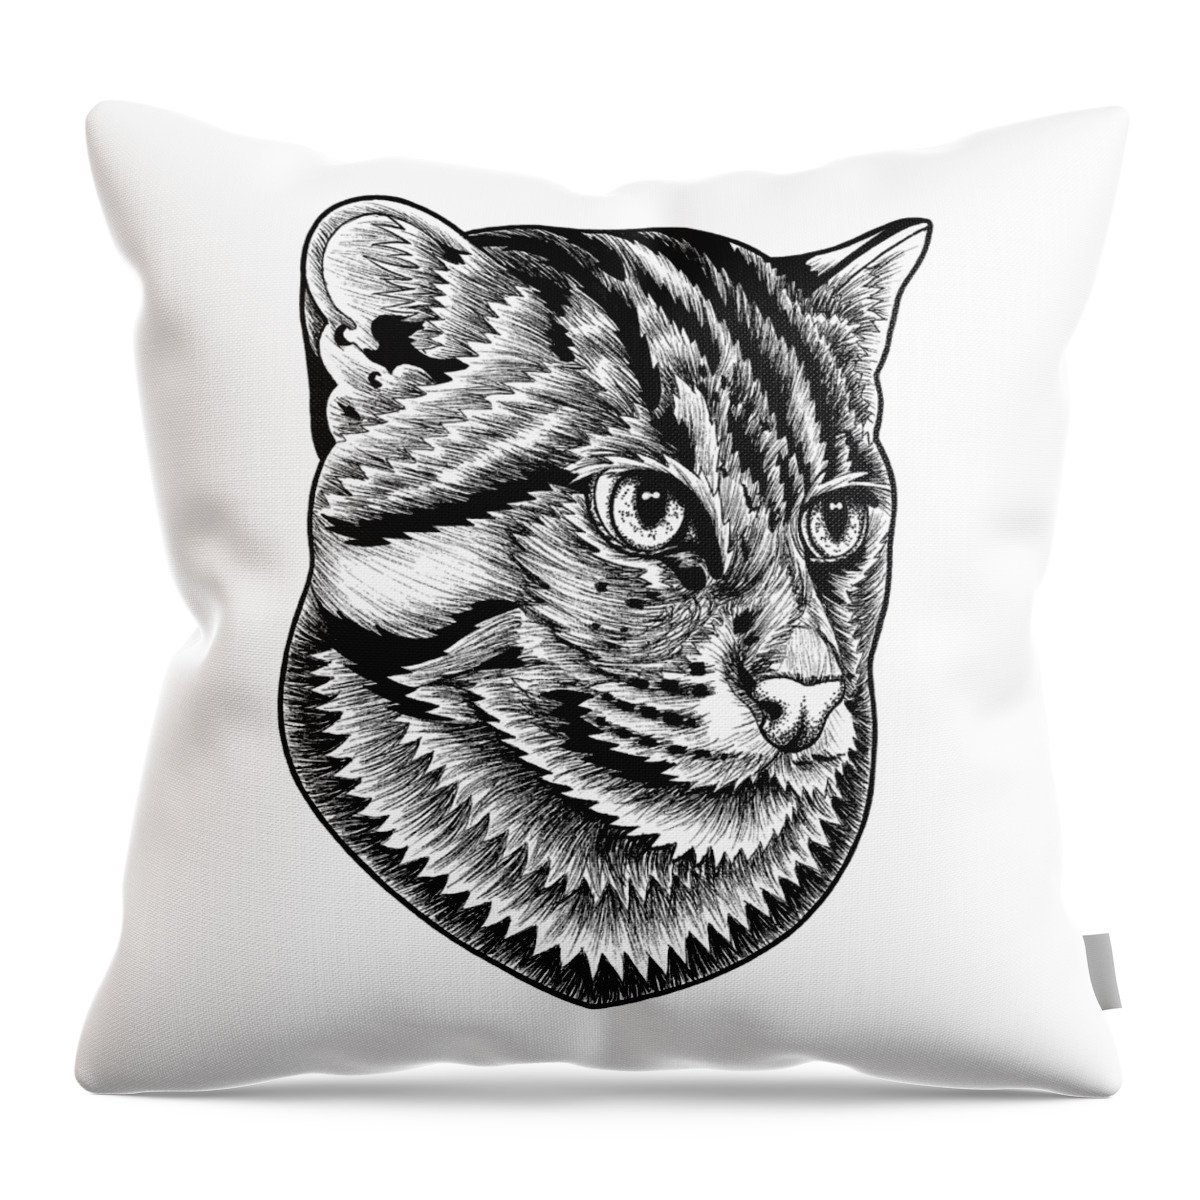 Fishing Cat Throw Pillow featuring the drawing Fishing cat ink illustration by Loren Dowding